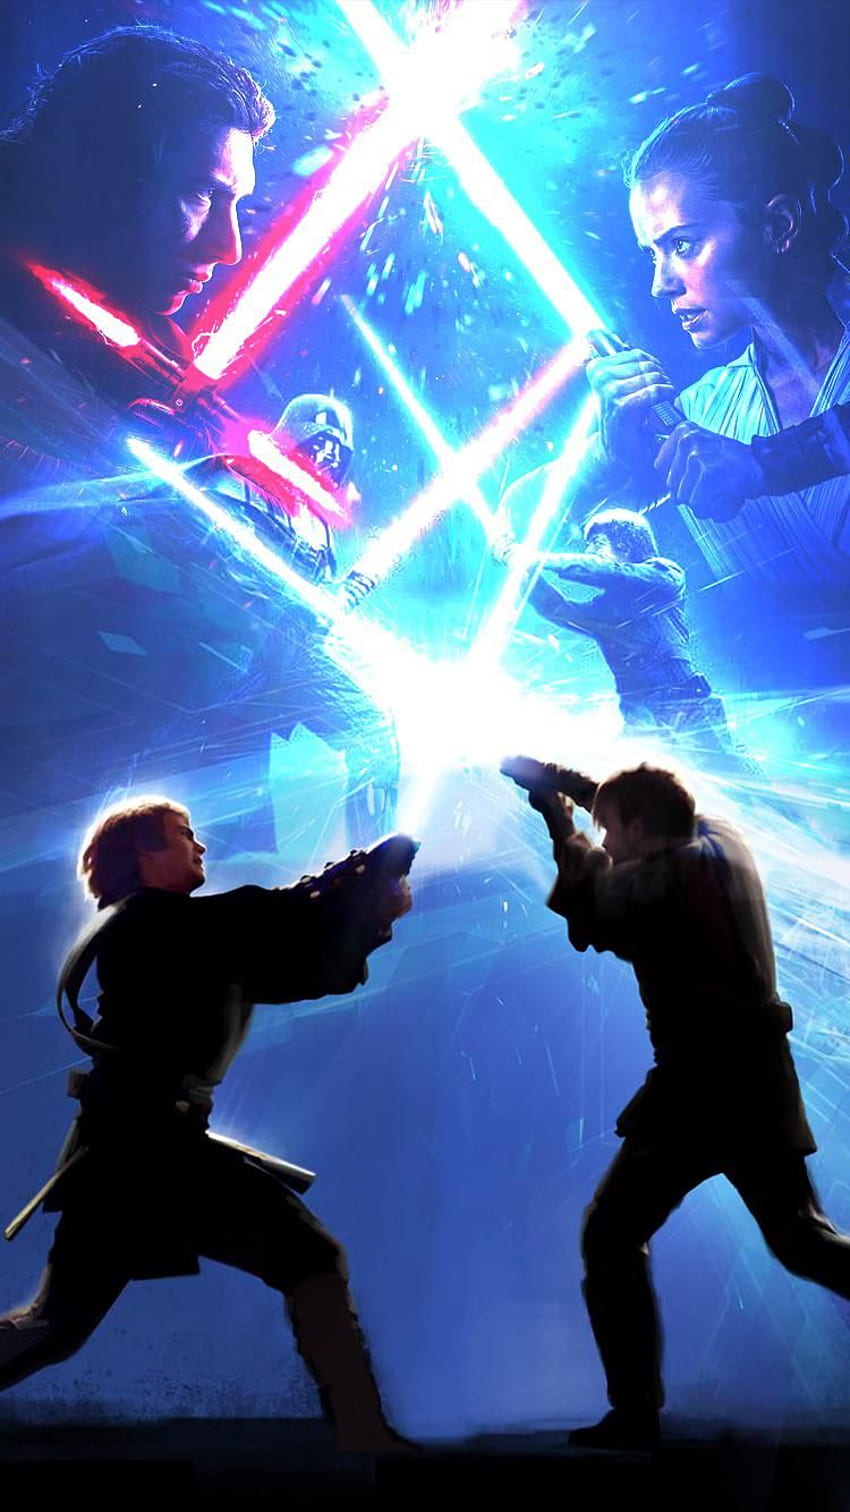 Anakin Skywalker Episode 3 iPhone Wallpaper HD You can download this free iPhone  Wallpaper for your iPh  Star wars actors Anakin skywalker Star wars  clone wars